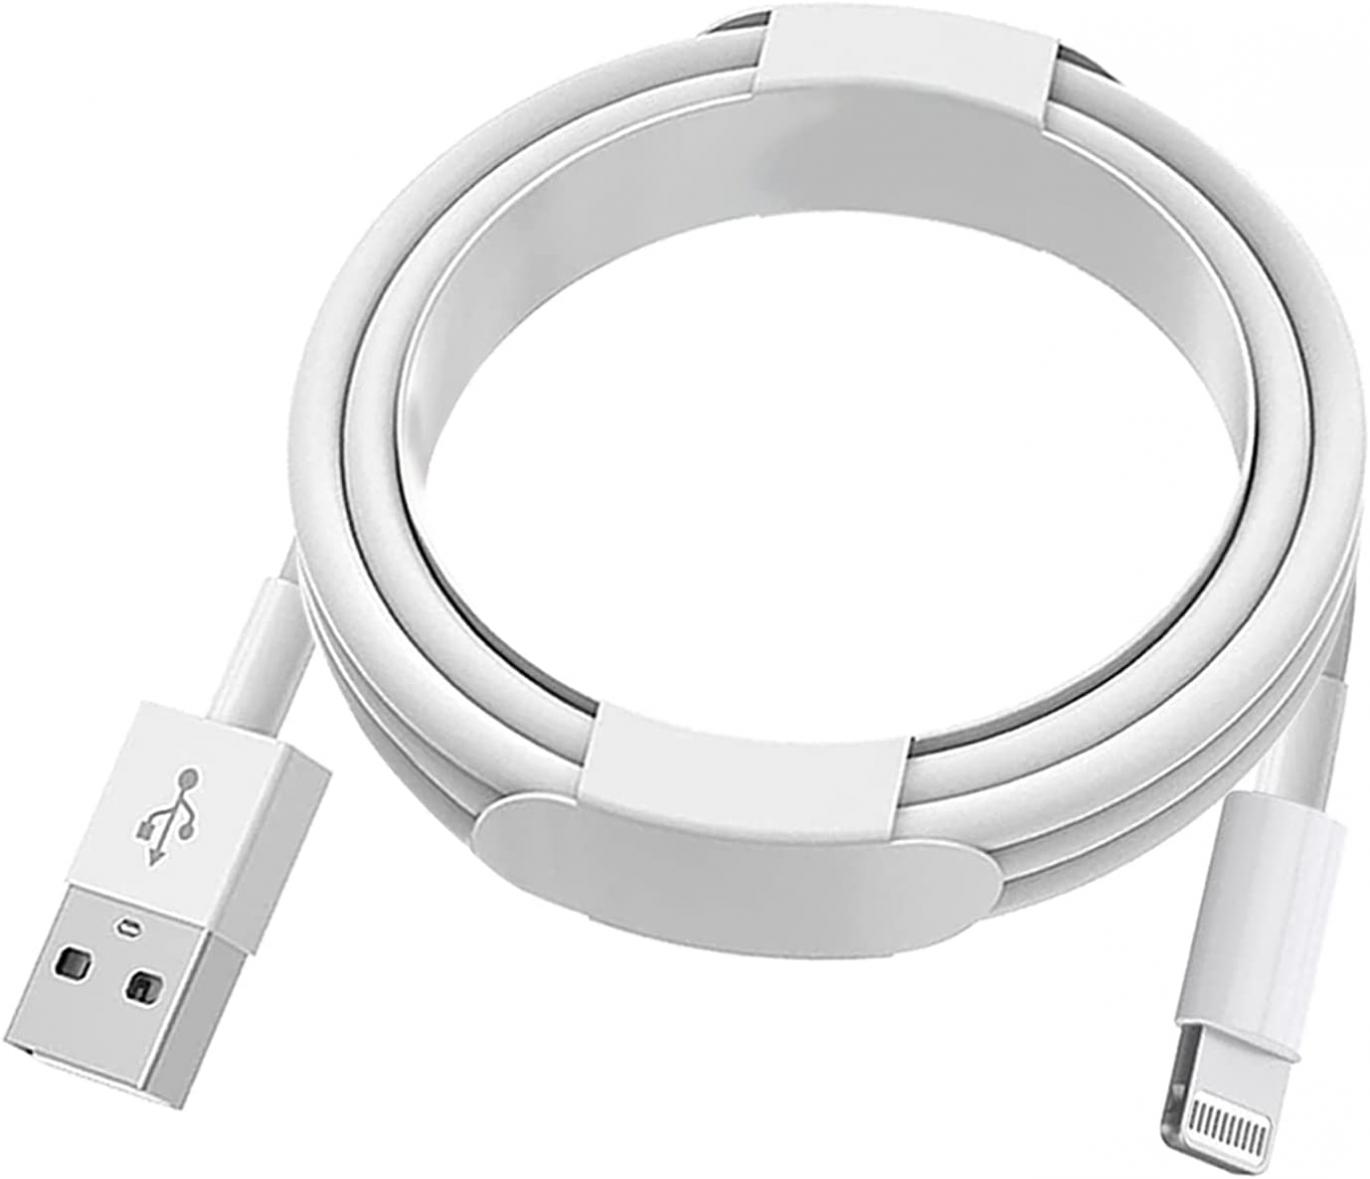 Apple MFi Certified iPhone Charger Cord 3ft Lightning Cable Fast Charging High Speed Data Sync USB Cable Compatible with iPhone 13/12/11 Pro Max/XS MAX/XR/XS/X/8/7/Plus/6S iPad AirPods